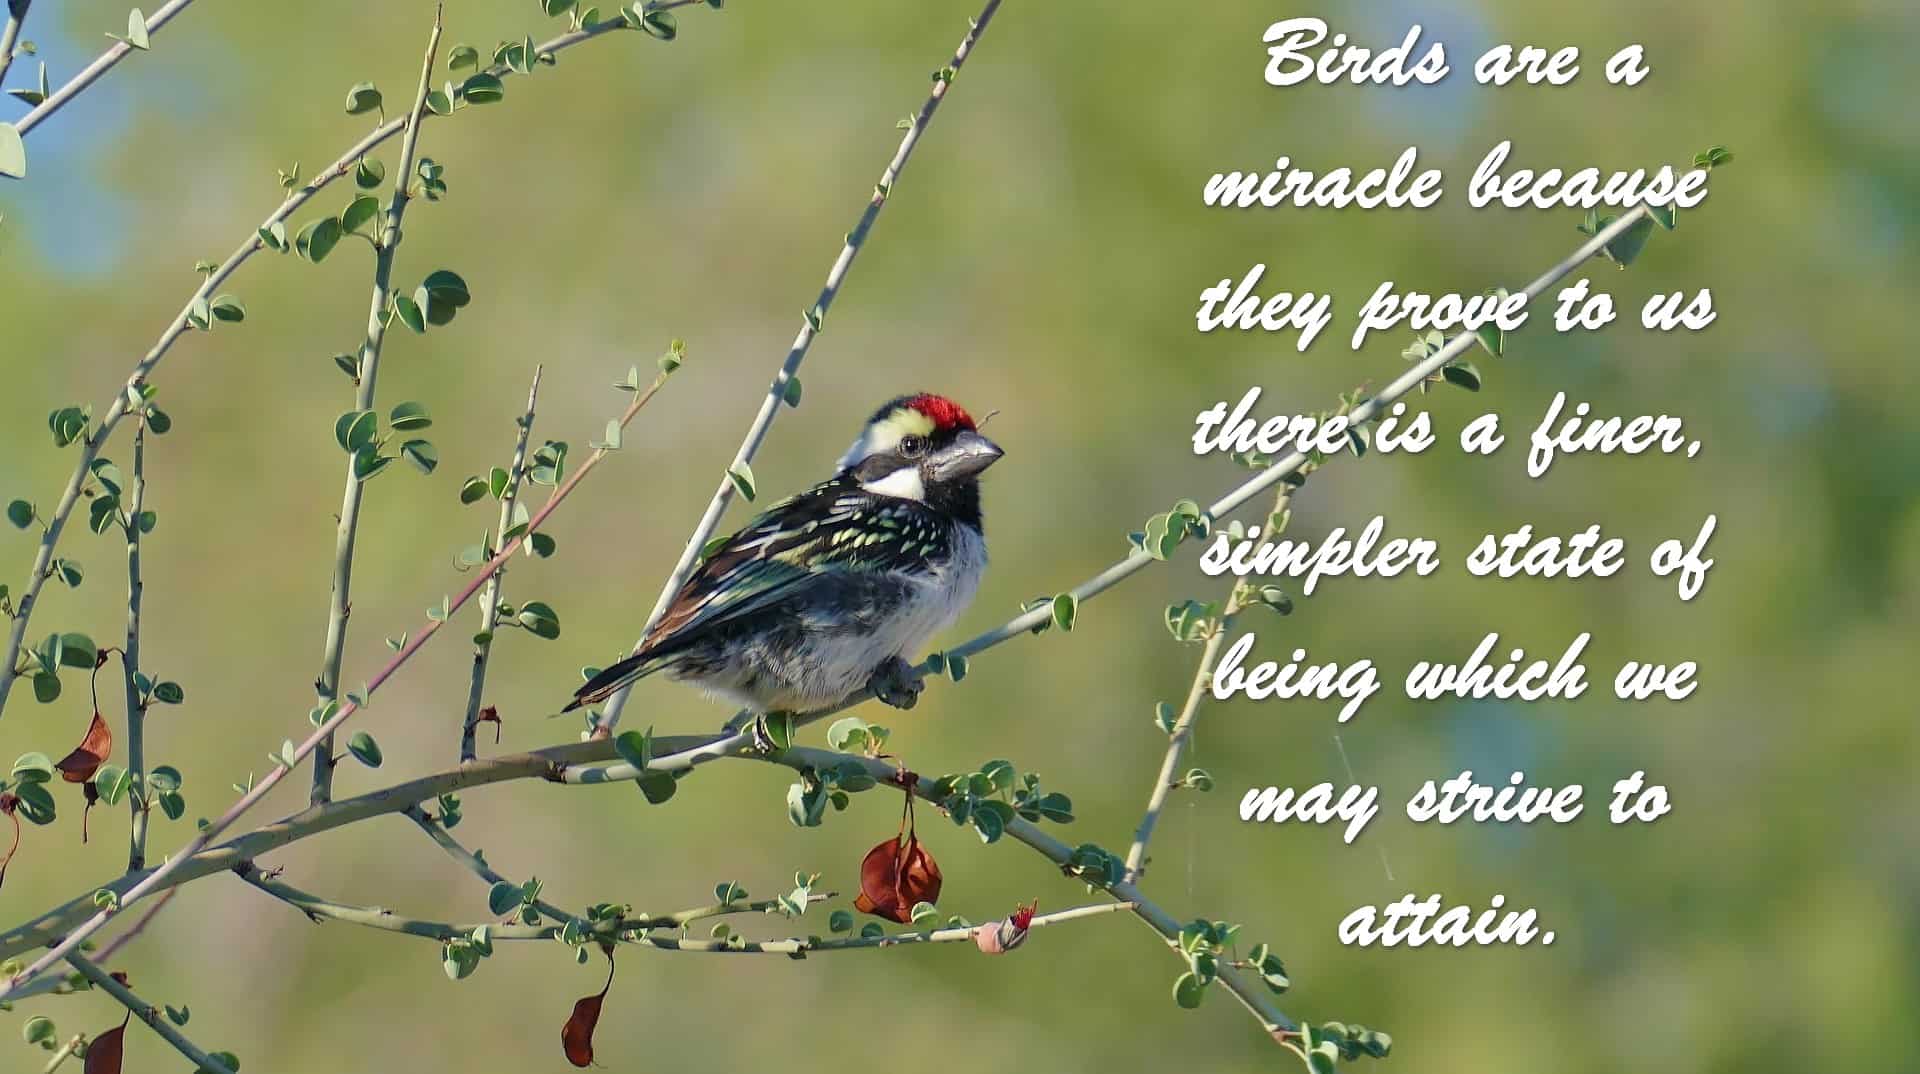 Birds are a miracle because they prove to us there is a finer, simpler state of being which we may strive to attain.